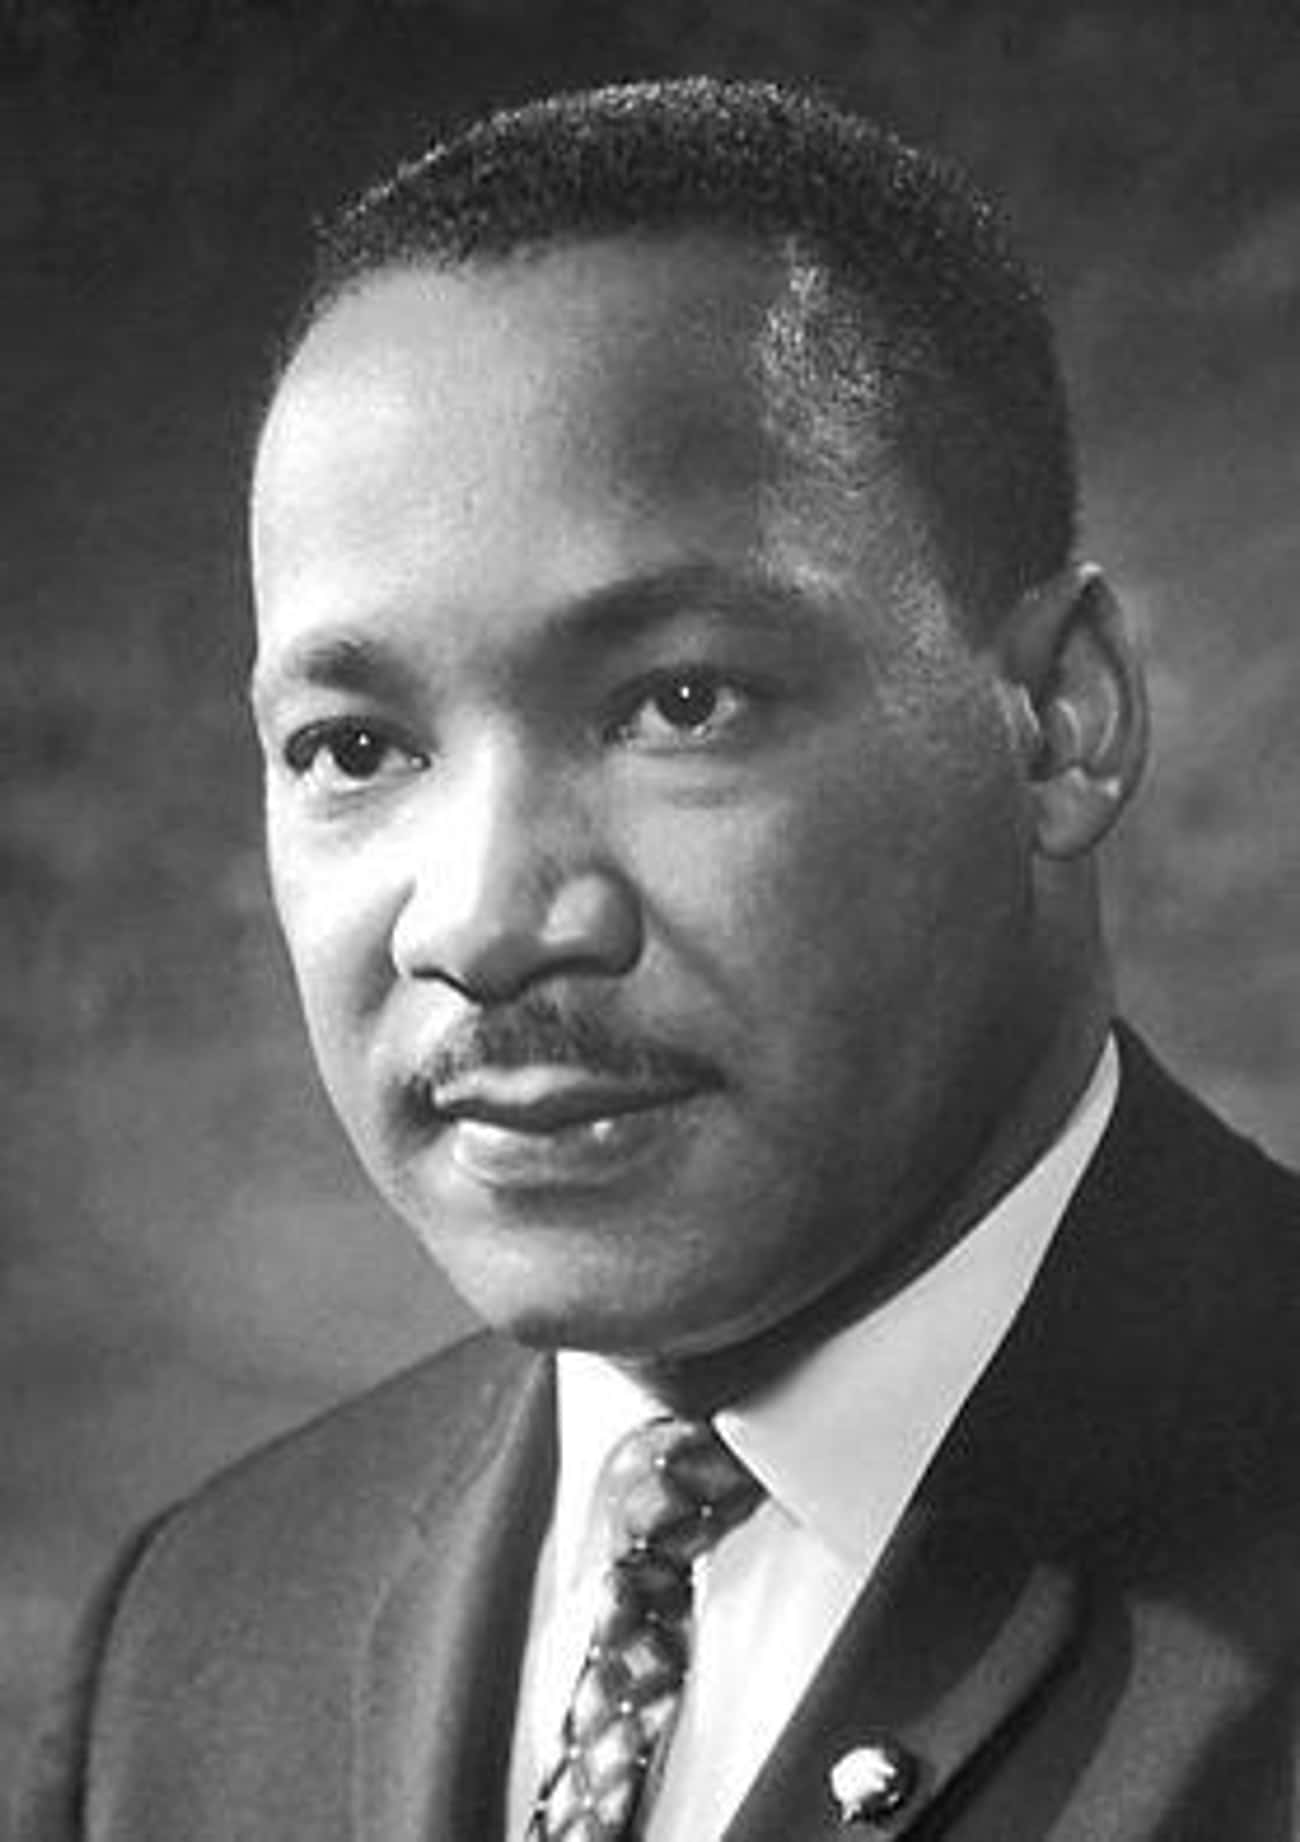 Martin Luther King, Jr. Spoke Out Against Racism